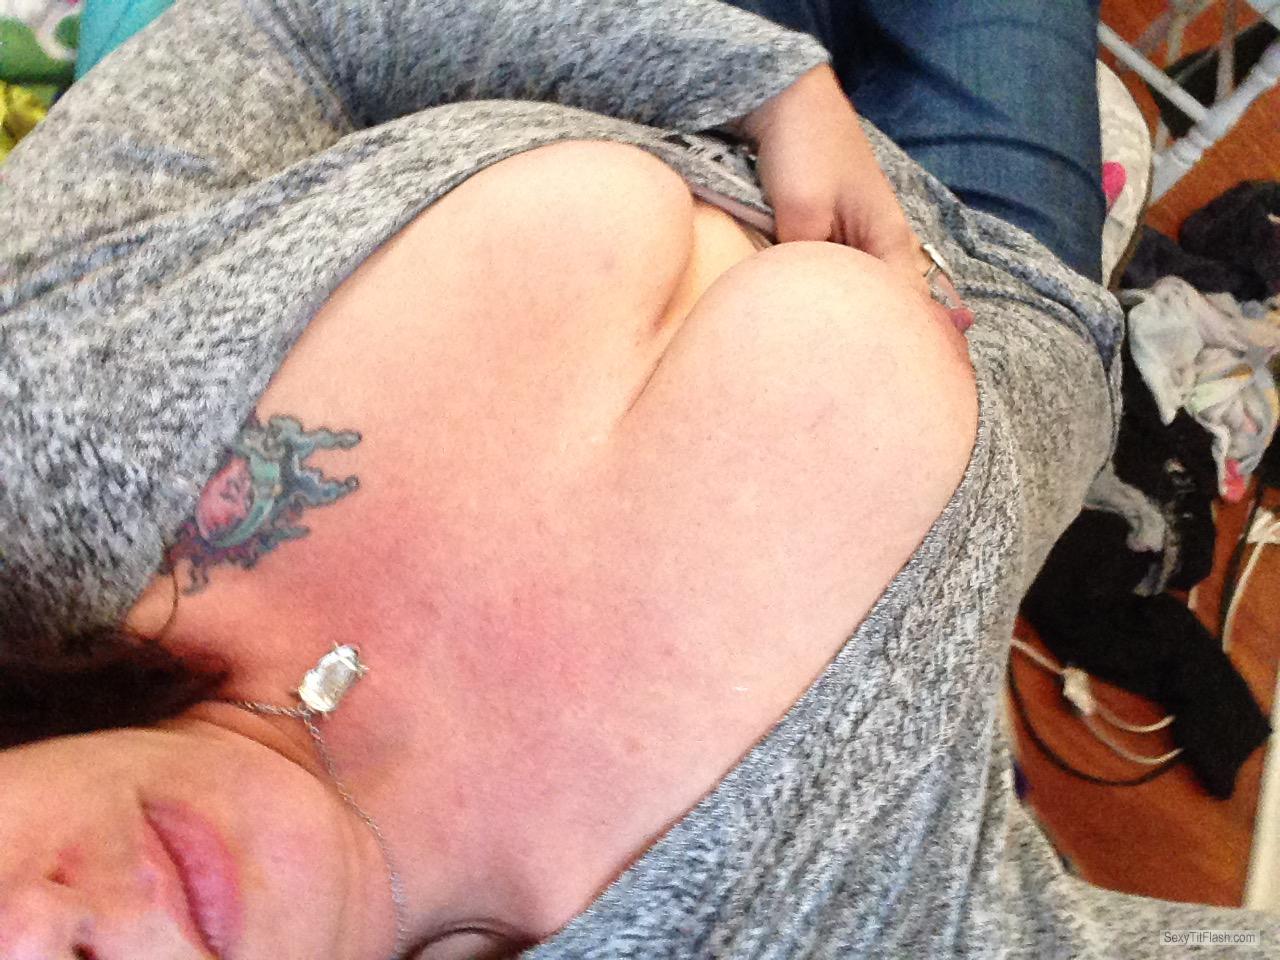 Tit Flash: My Very Big Tits (Selfie) - Joie from United States